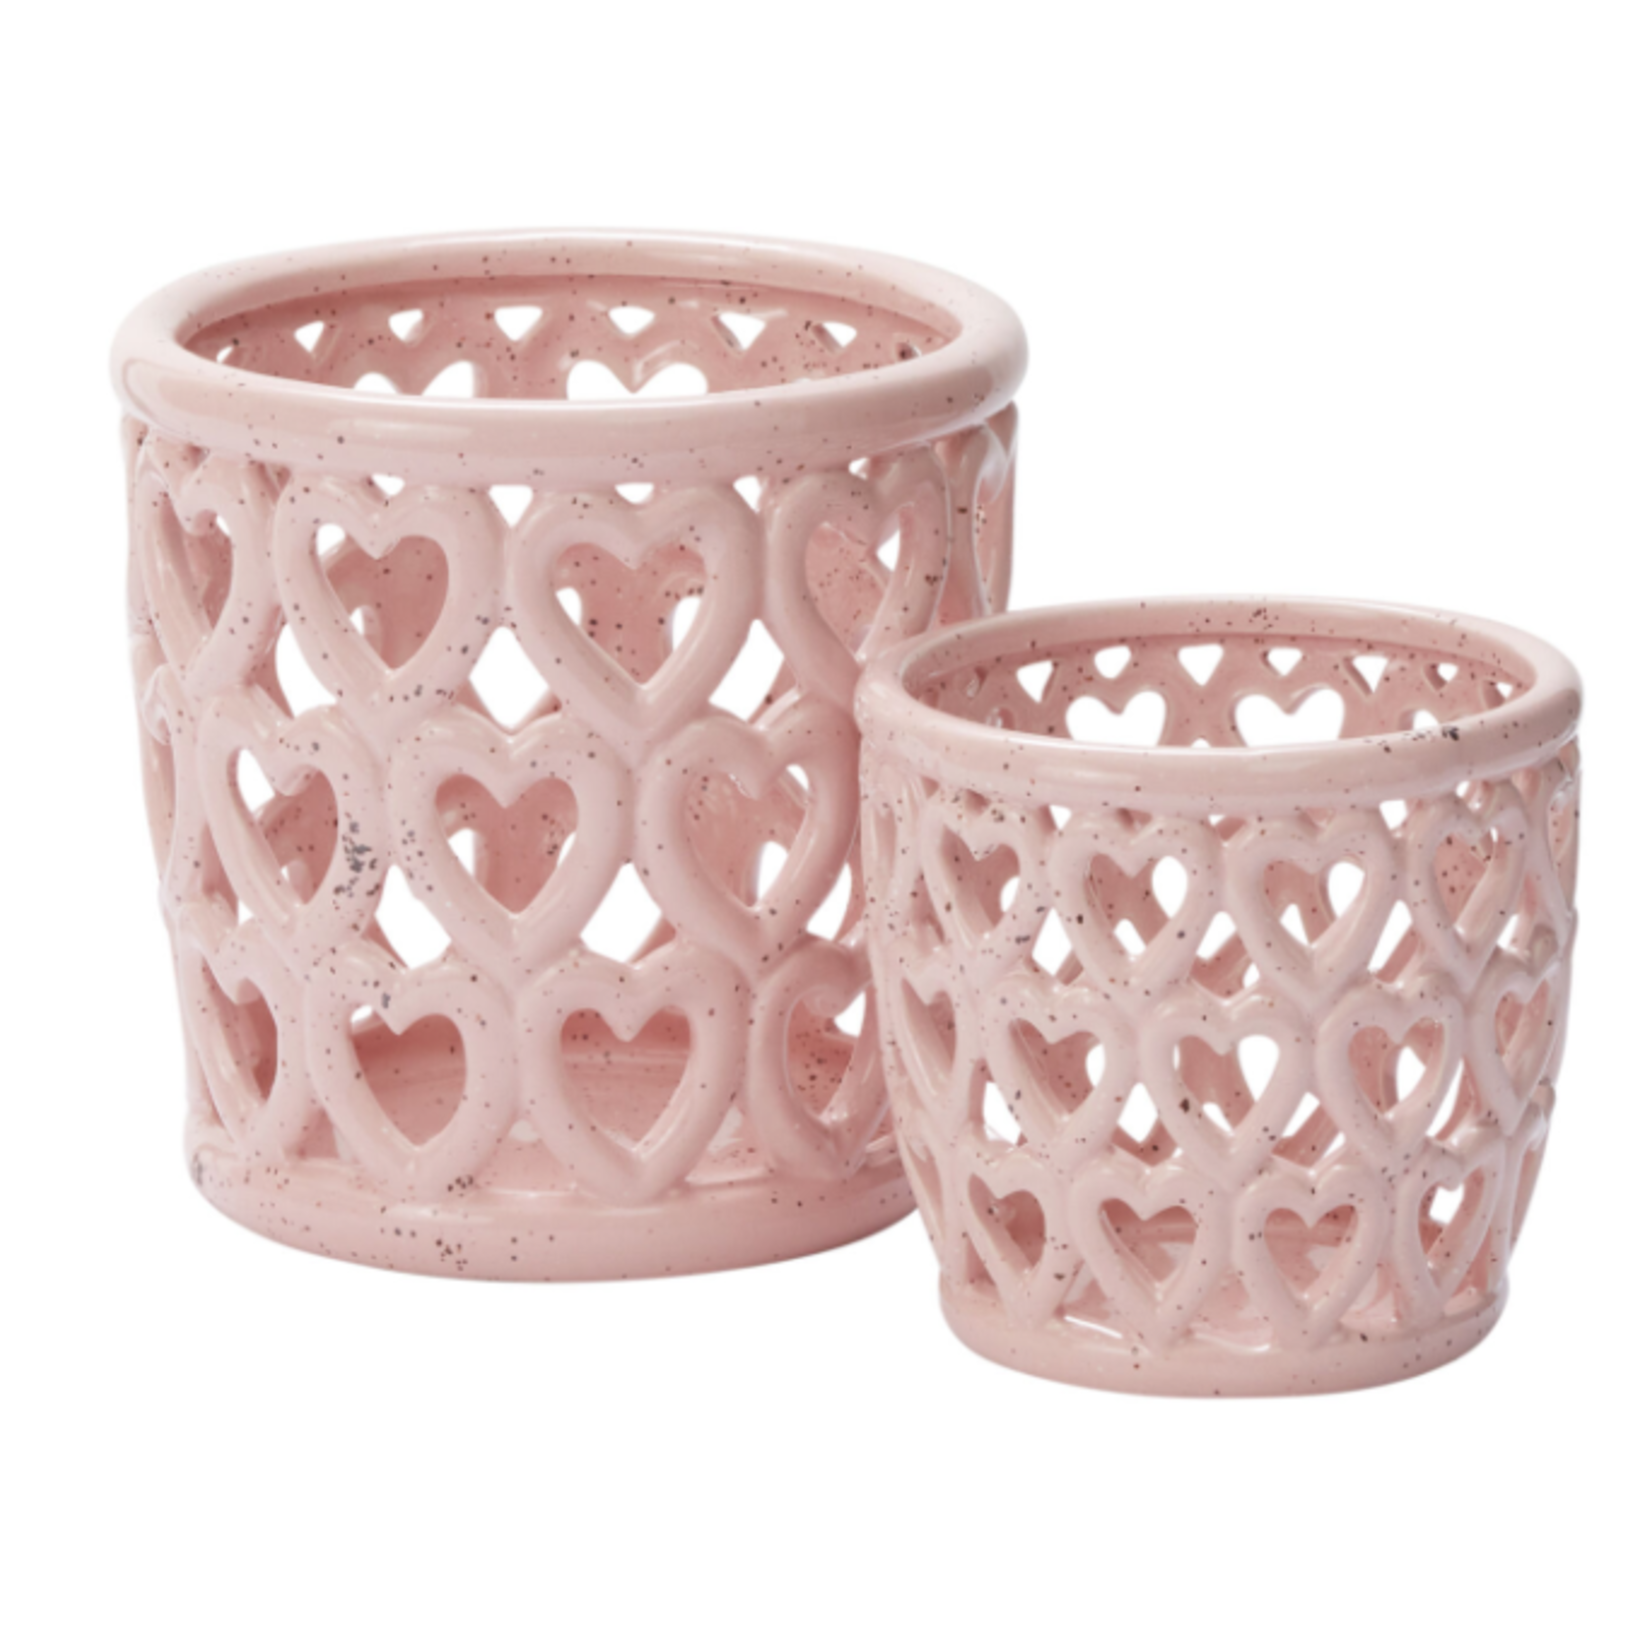 40$ off was $13 now $7.79, 5.25” X 5.25” PINK CERAMIC CHERISHED HEARTS ORCHID POT